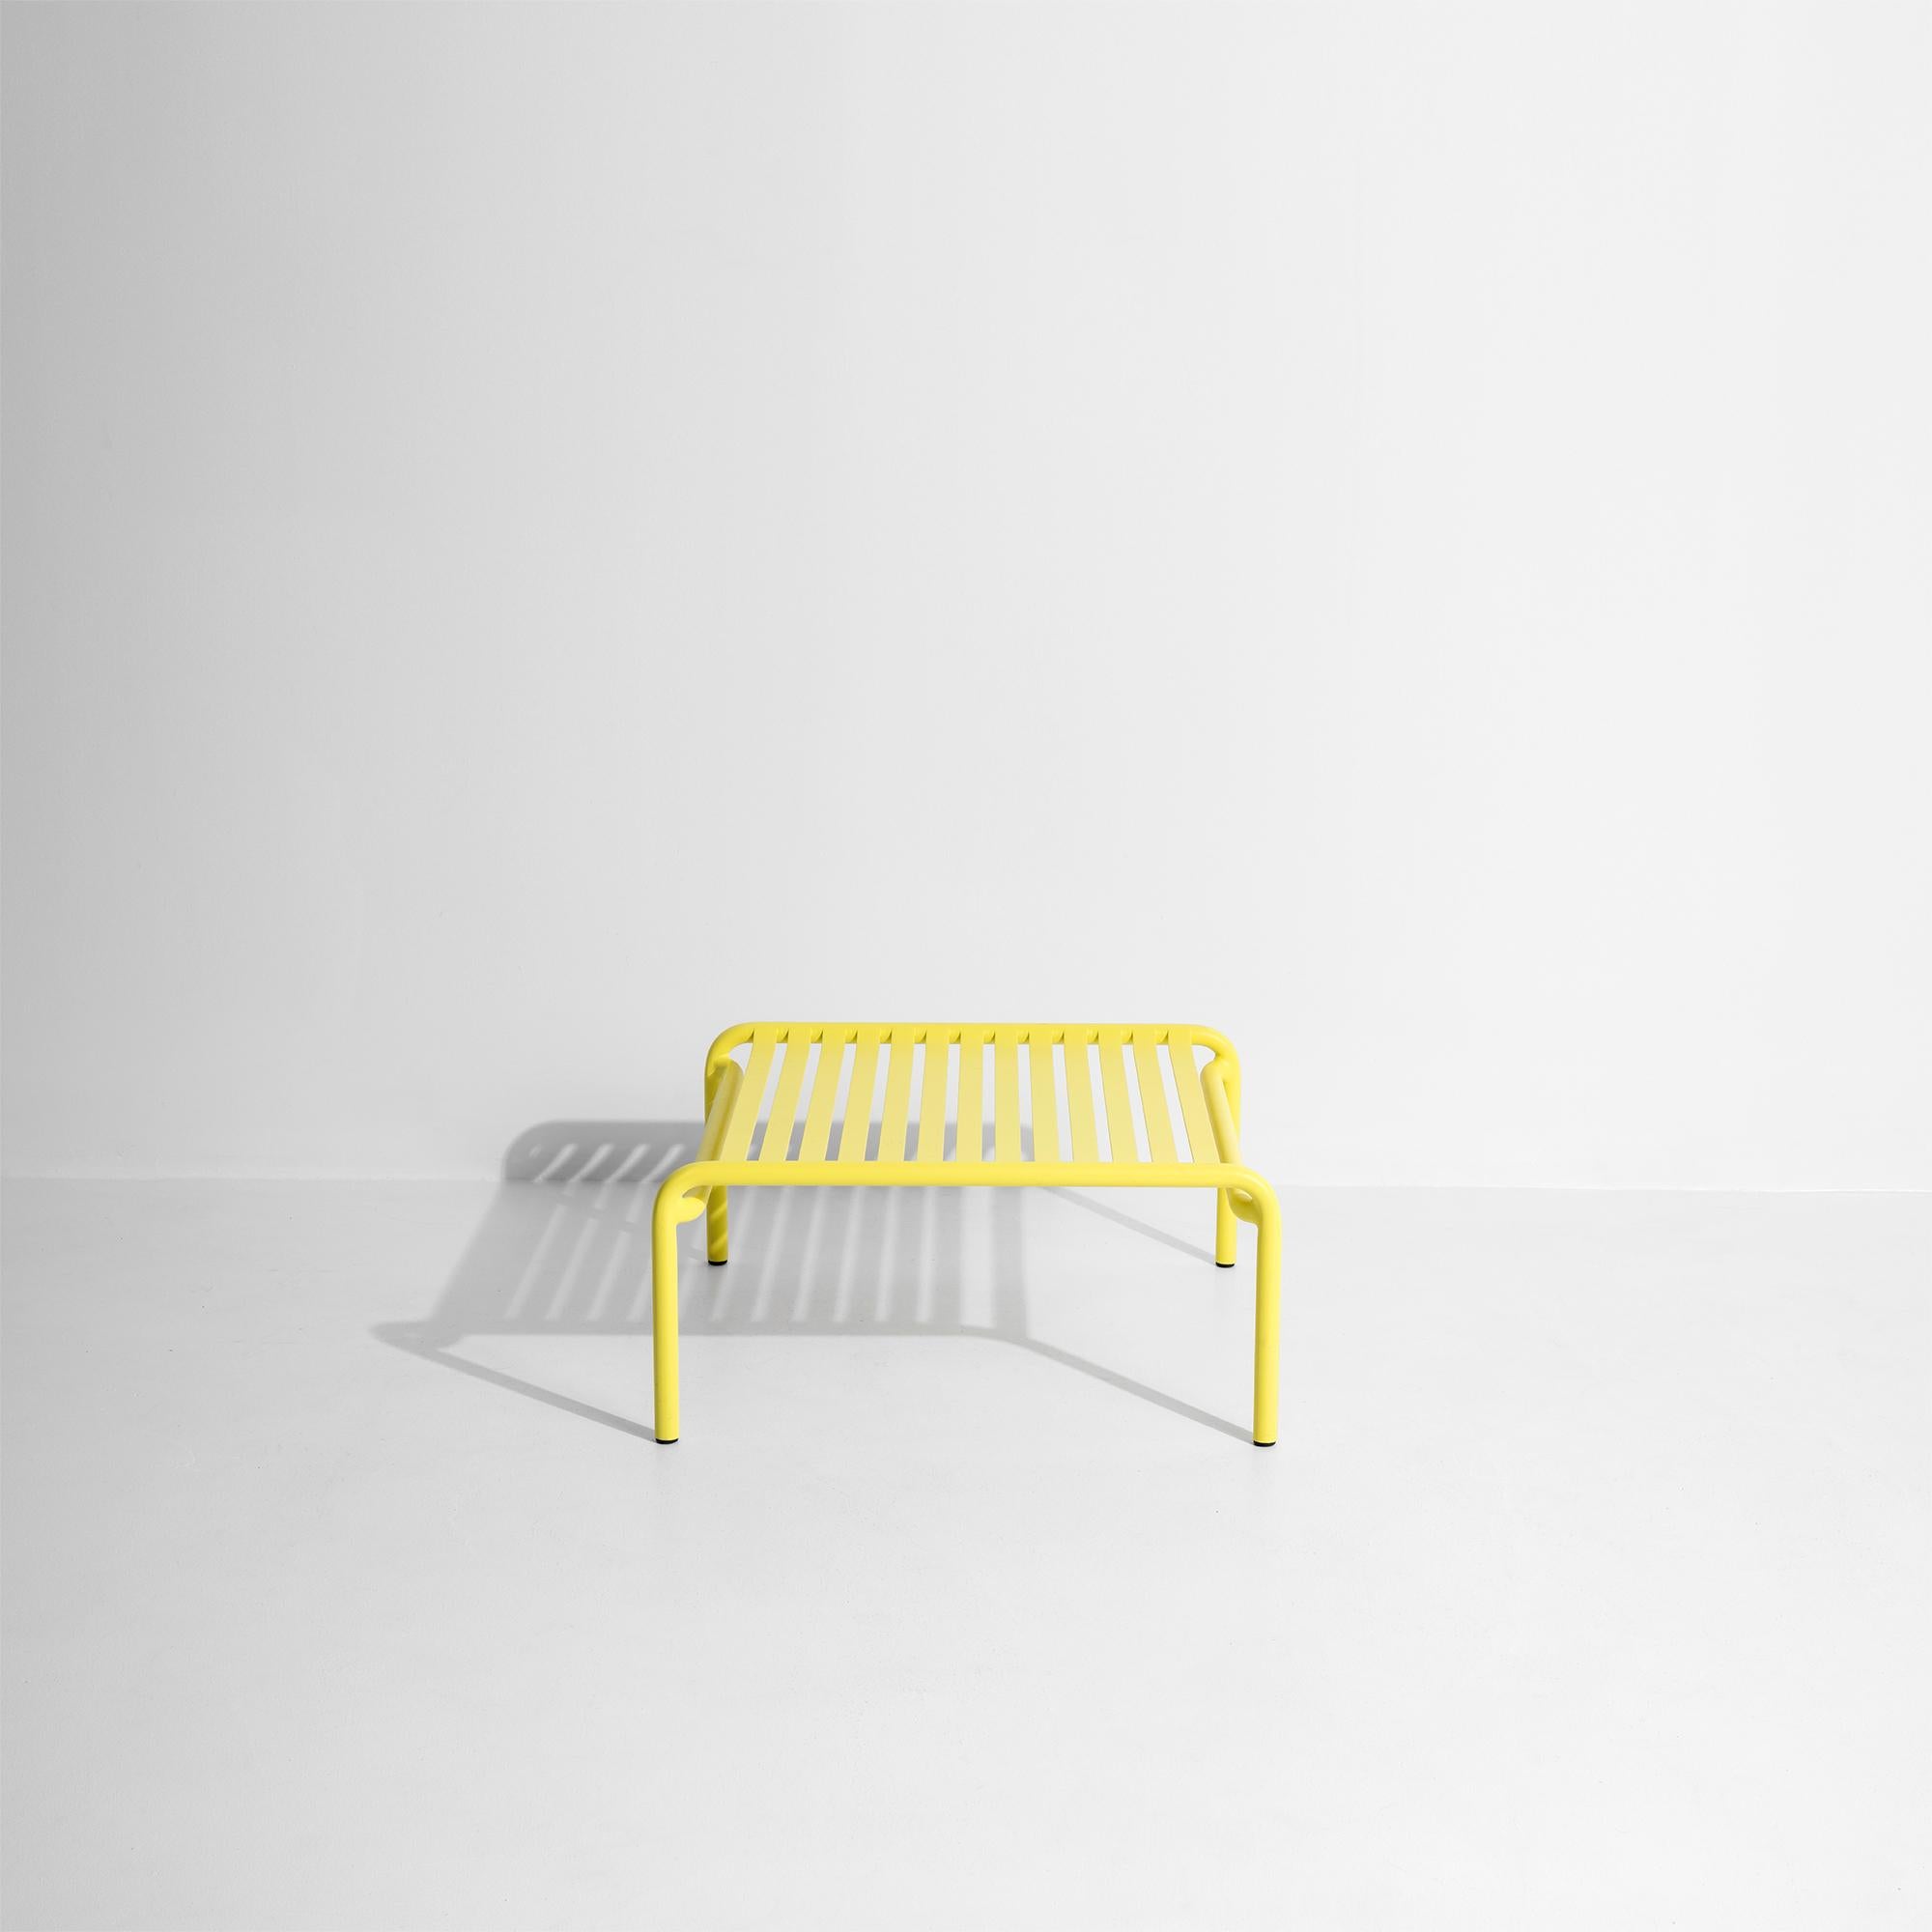 Contemporary Petite Friture Week-End Coffee Table in Yellow Aluminium, 2017 For Sale